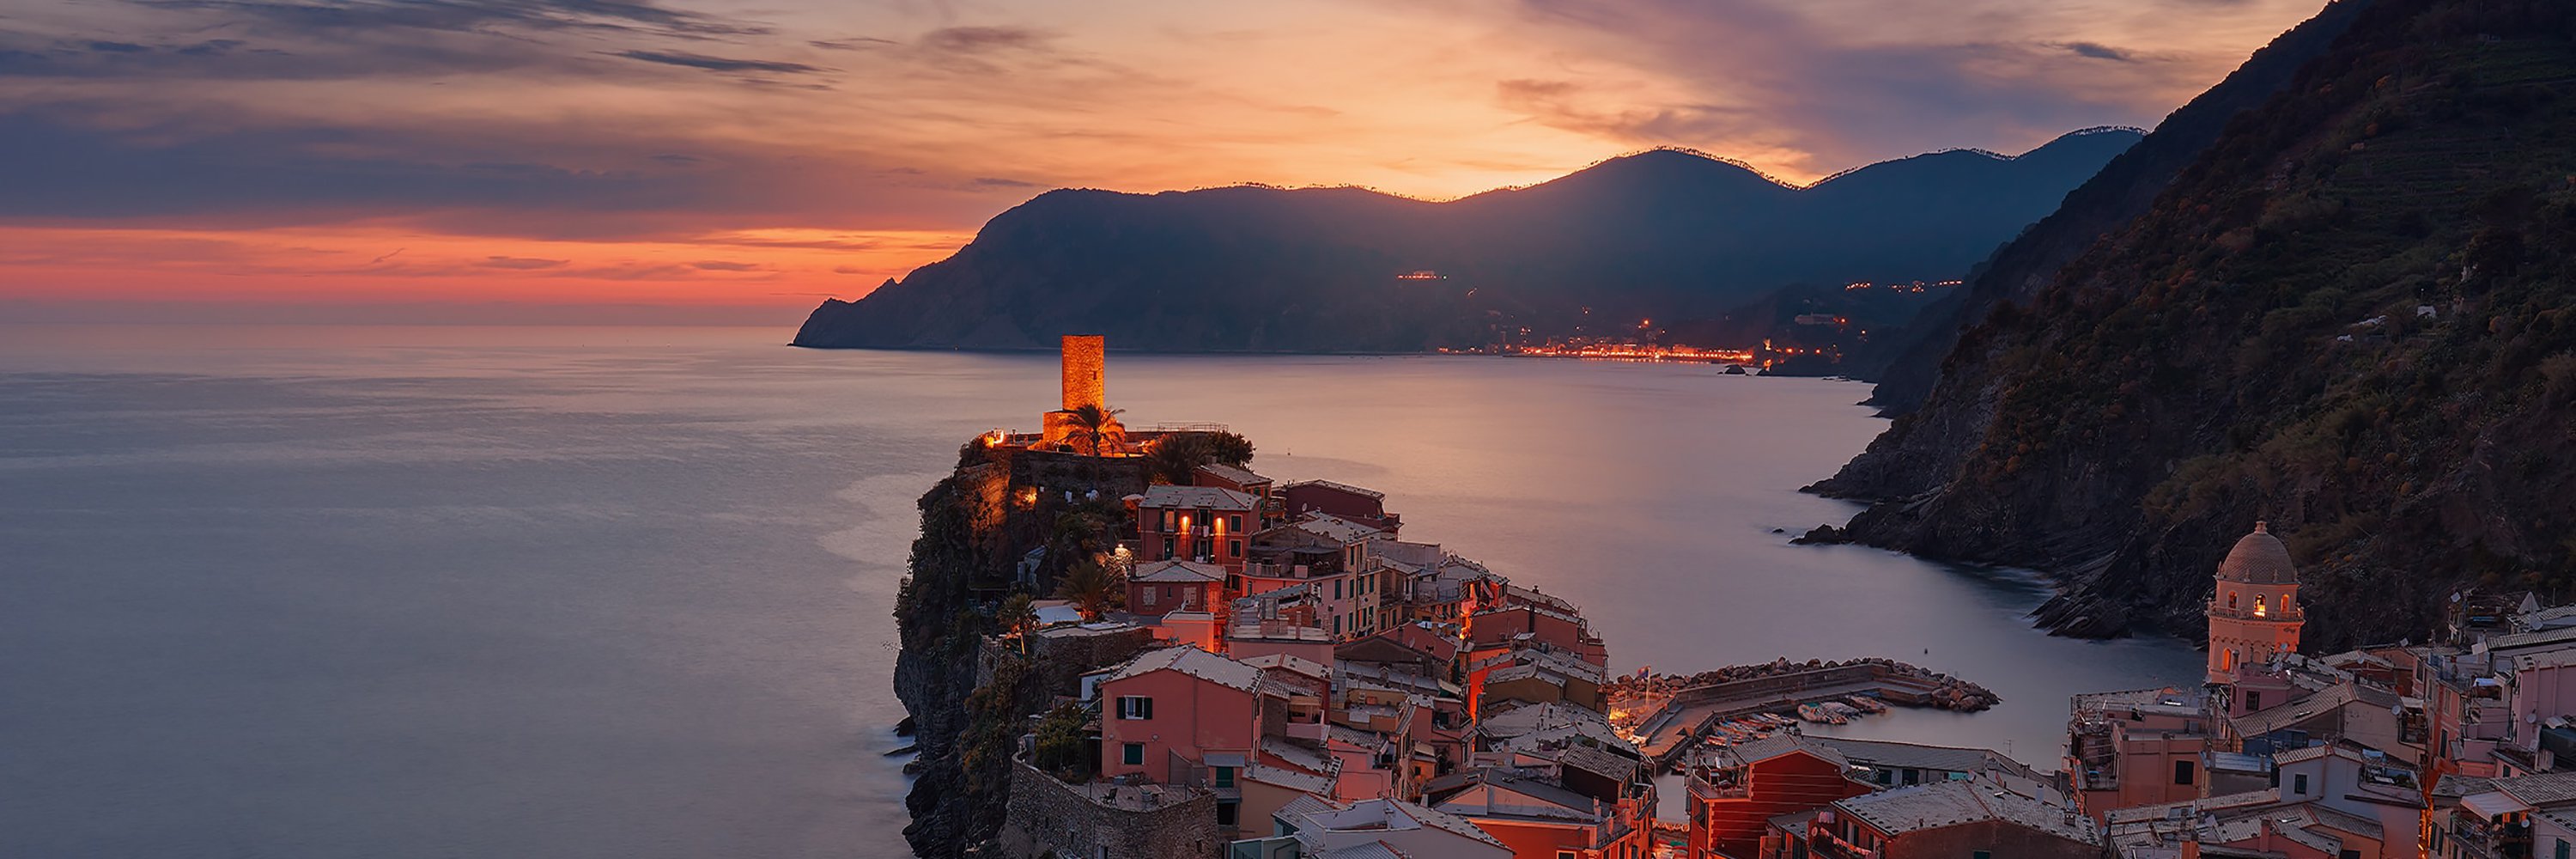 Sunset over Vernazza, Italy